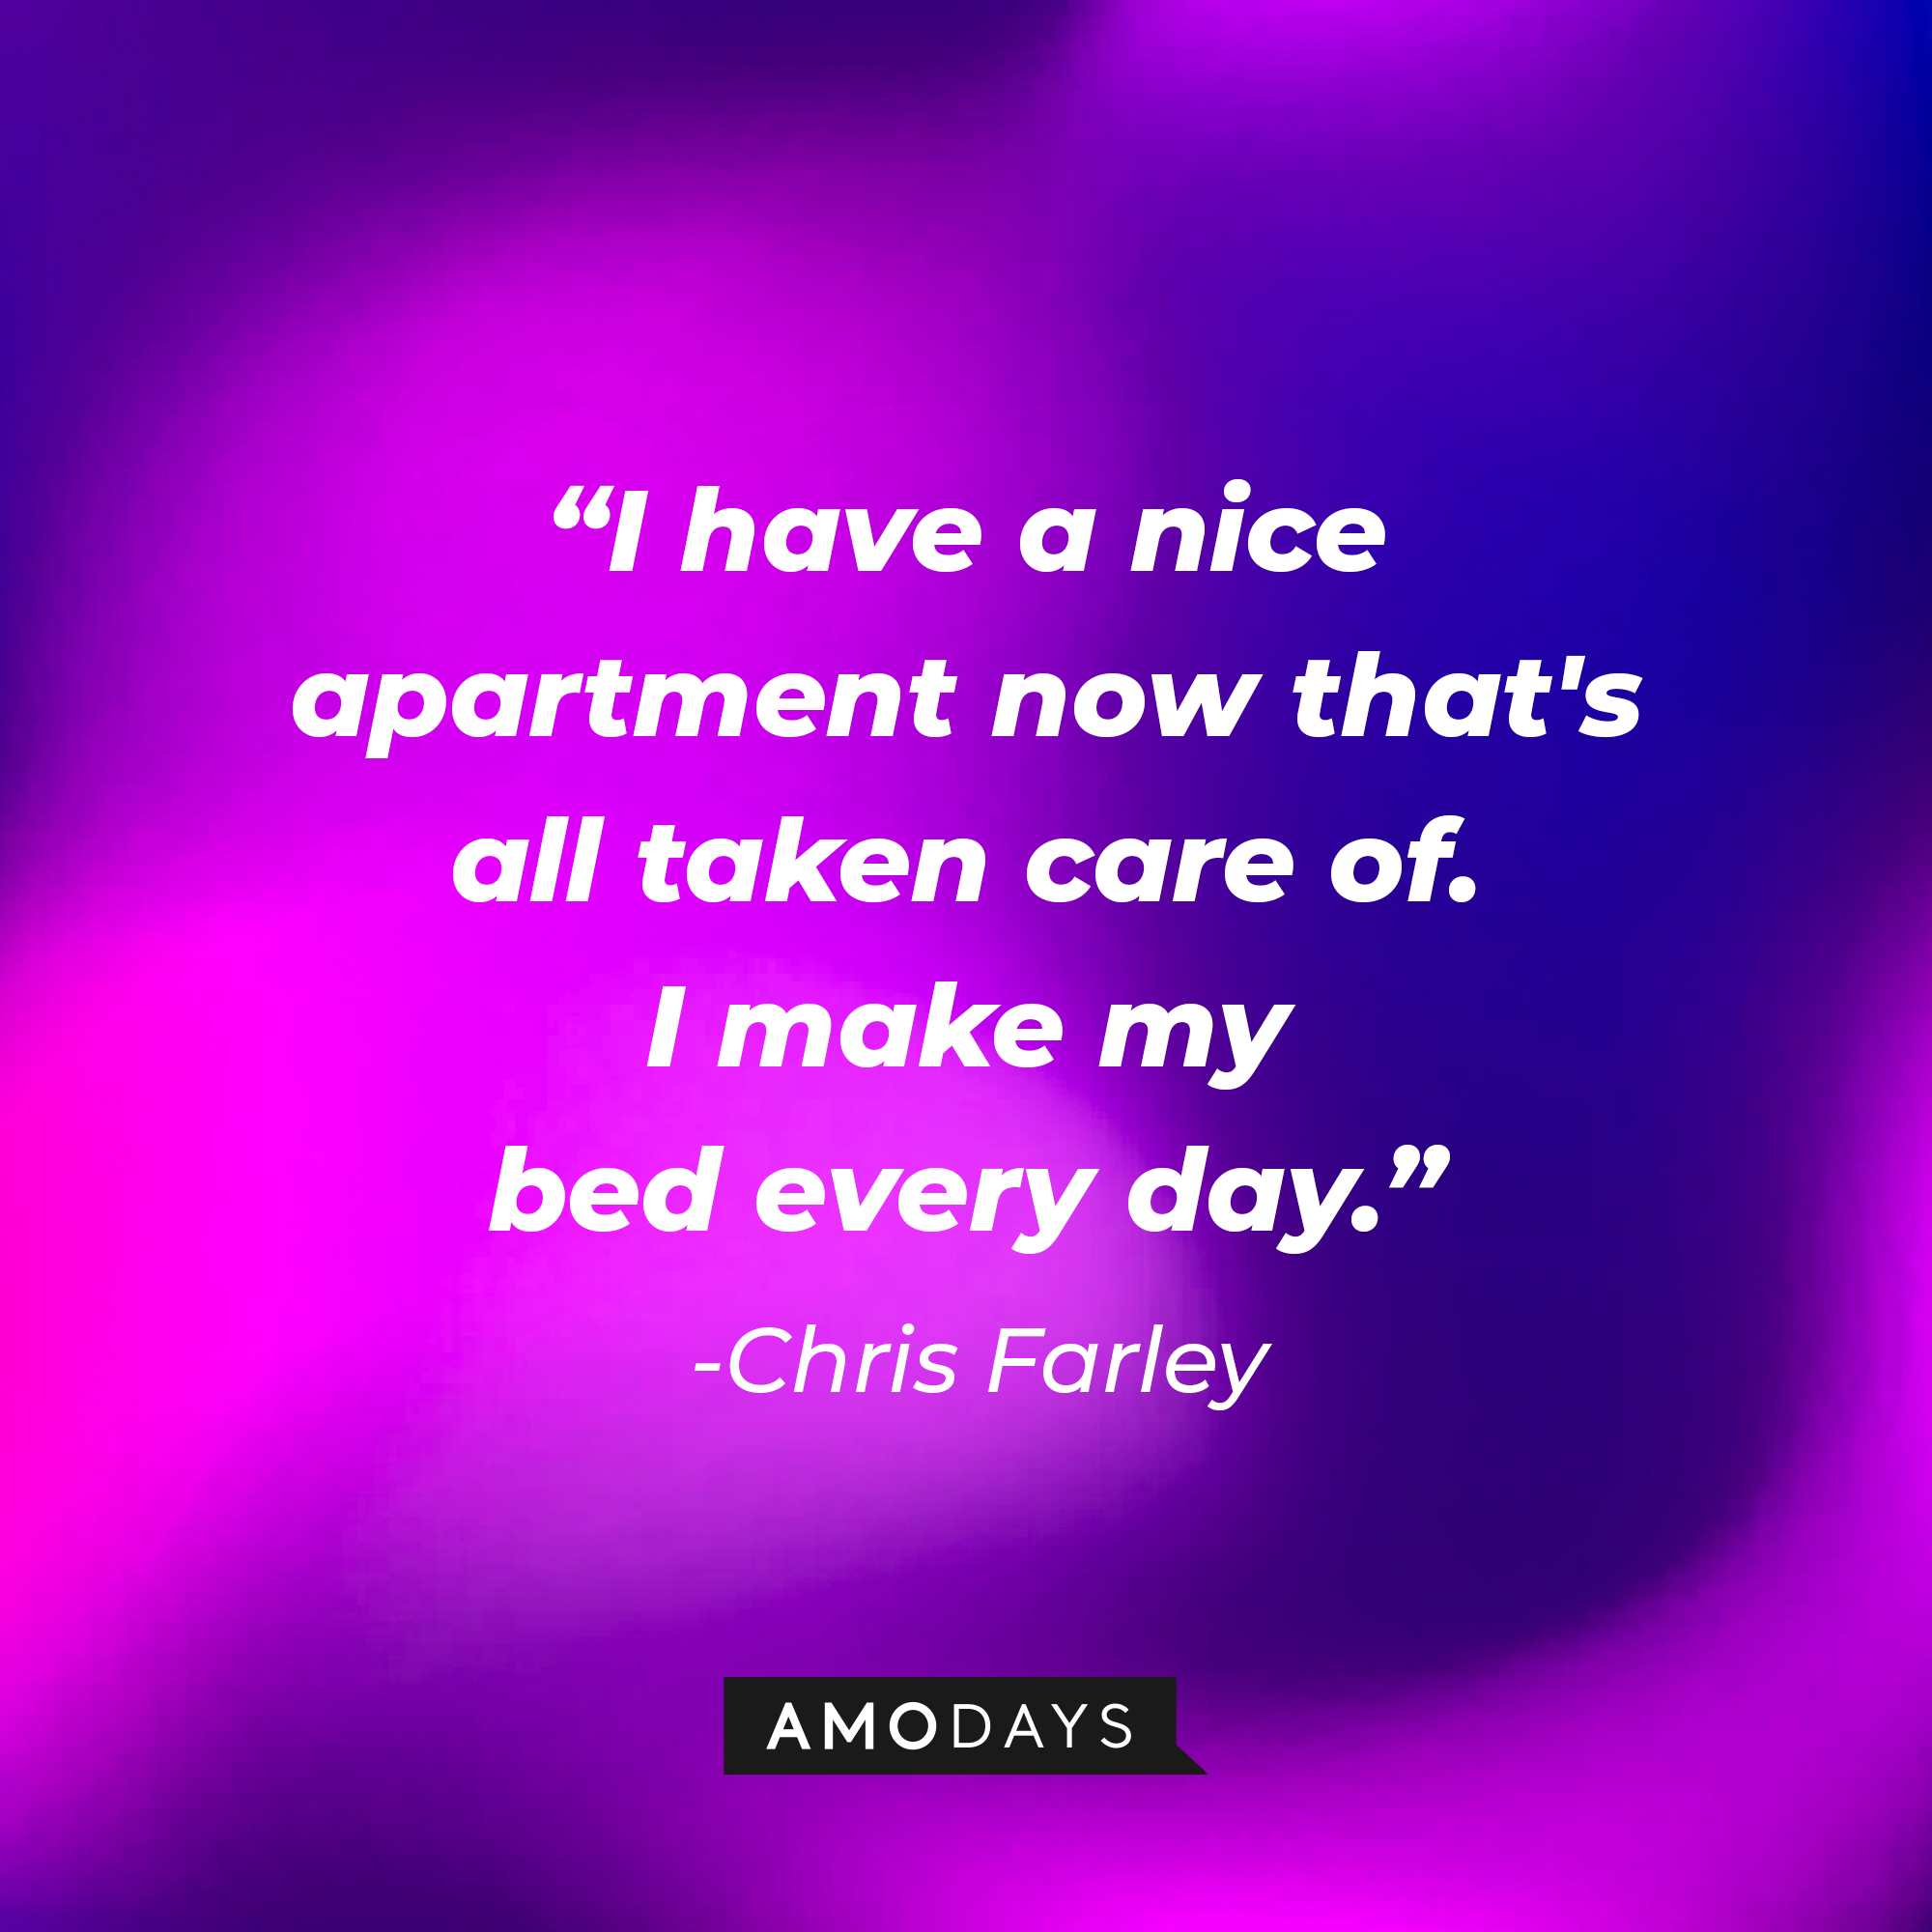 Chris Farley's quote: "I have a nice apartment now that's all taken care of. I make my bed every day." | Source: Amodays